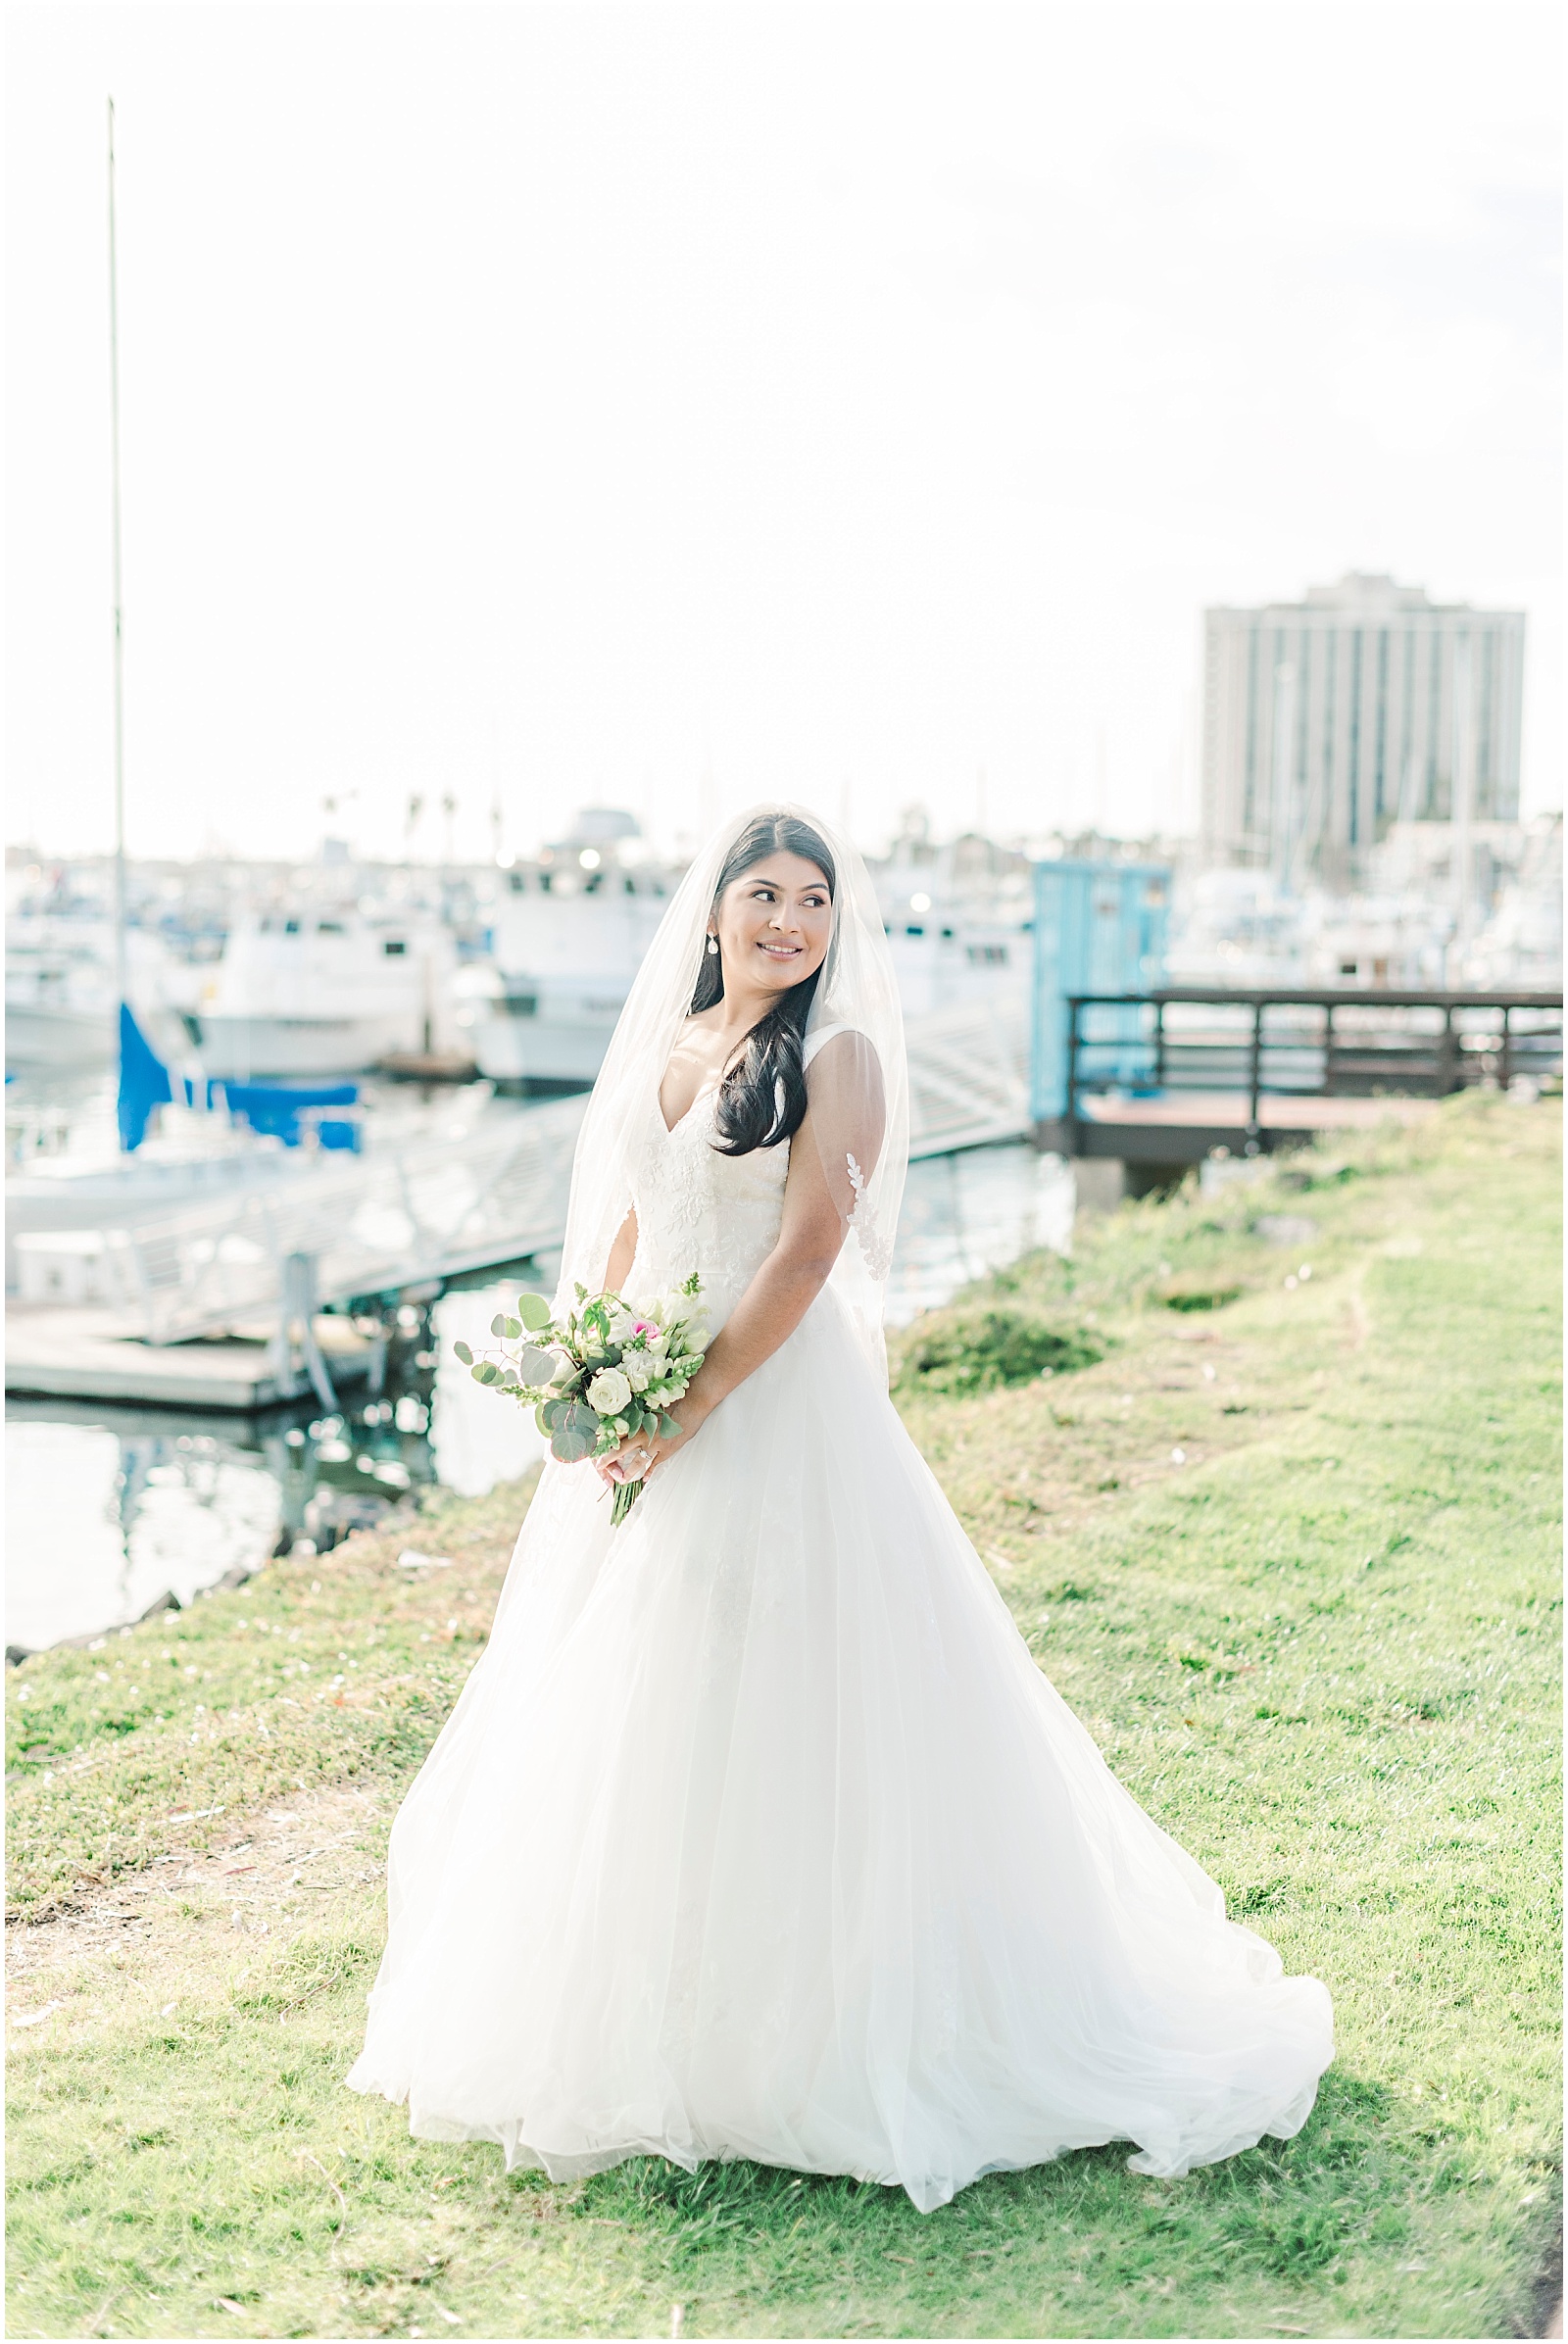 Marina Village Wedding by Mollie Jane Photography. To see more go to www.molliejanephotography.com